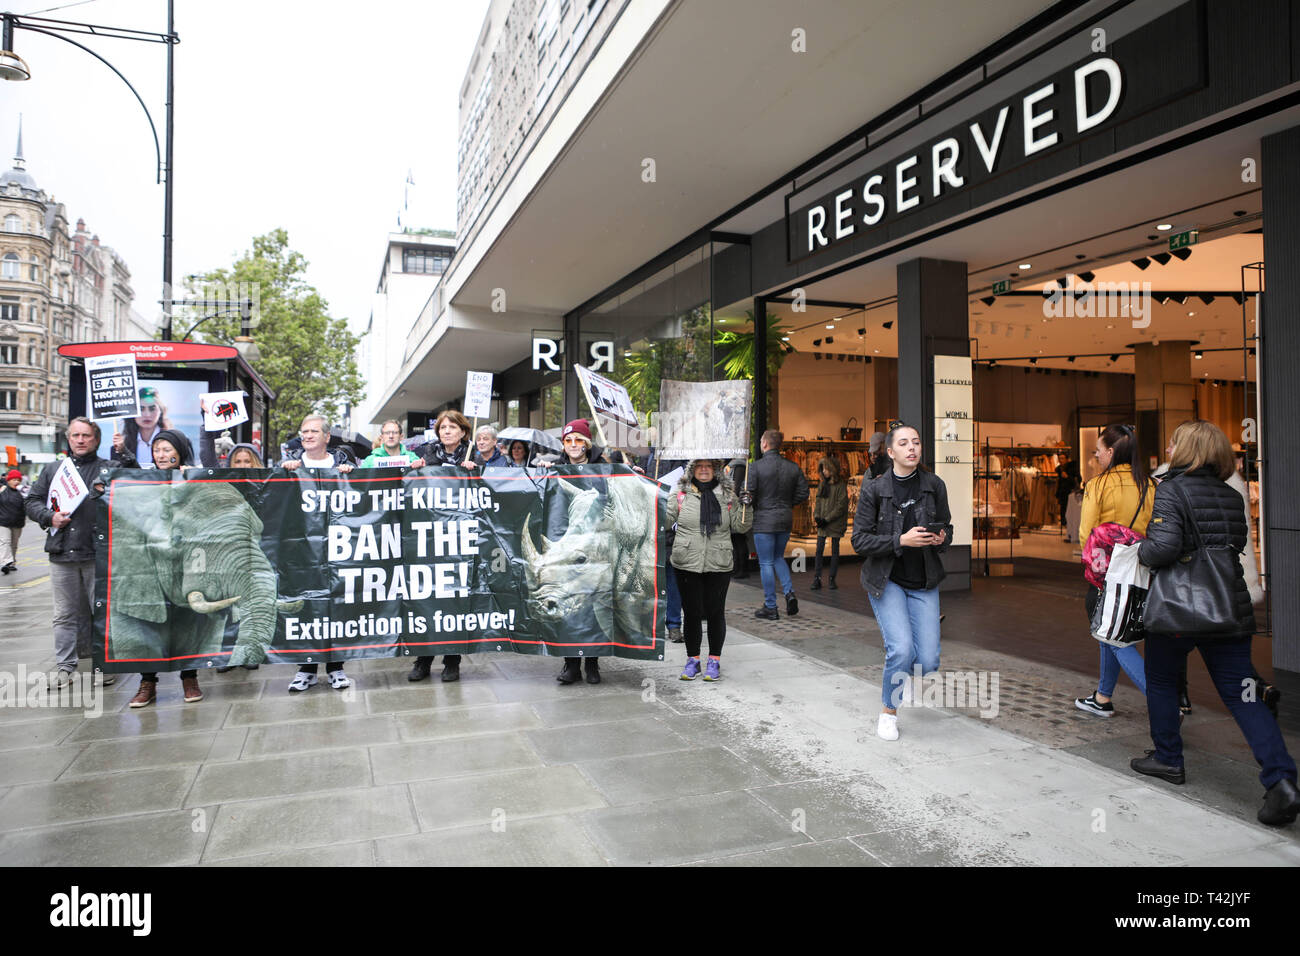 London, UK. 13th April, 2019. The 5th Global March for Elephants and Rhinos march from Cavendish Square to Downing Street for a day of action against trophy hunting and endangered wildlife. Penelope Barritt/Alamy Live News Stock Photo